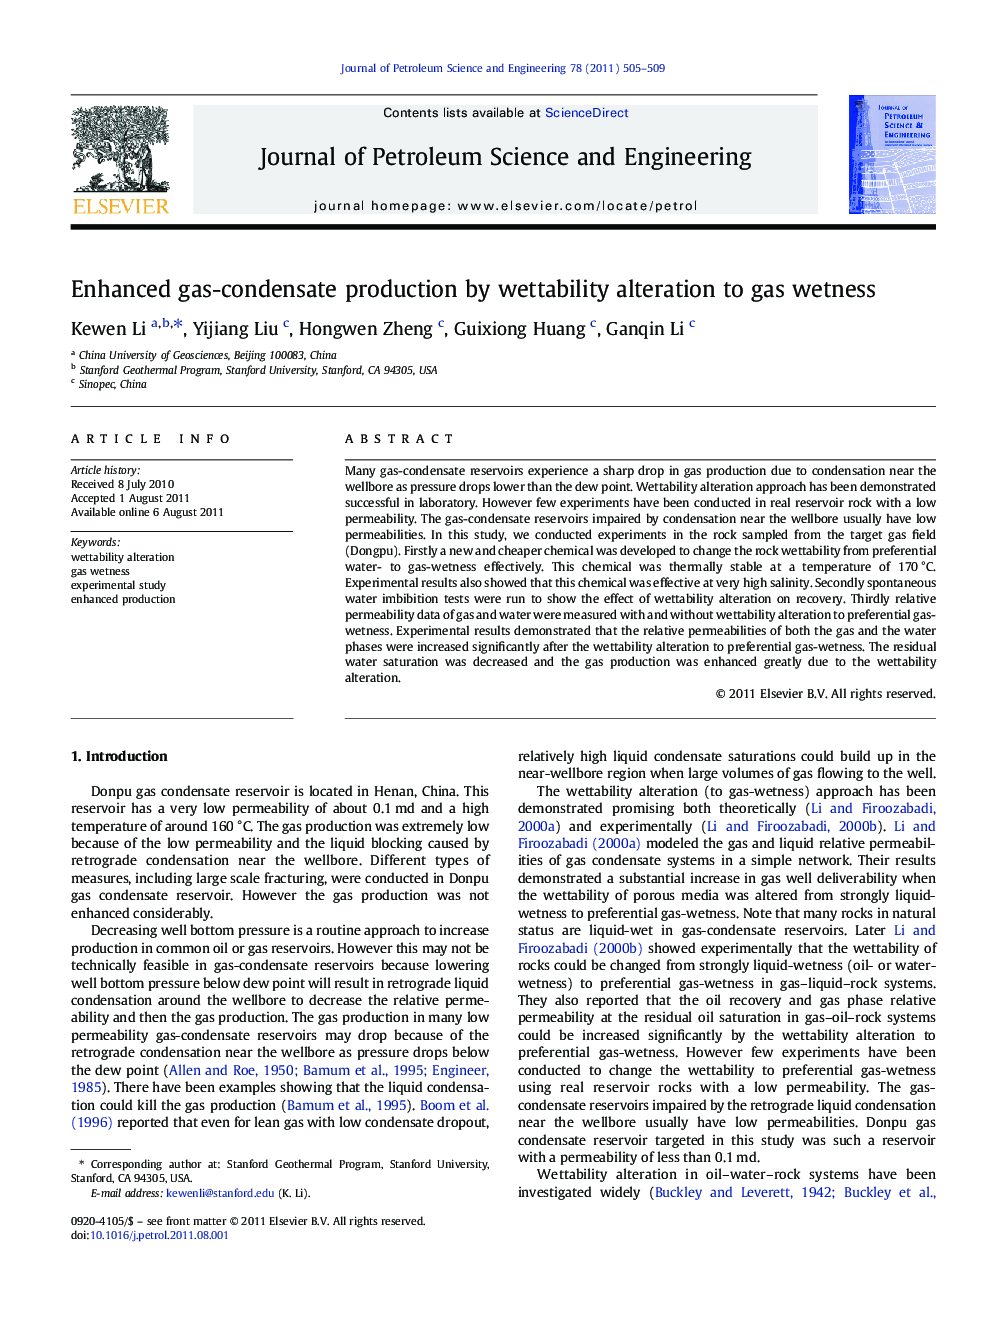 Enhanced gas-condensate production by wettability alteration to gas wetness